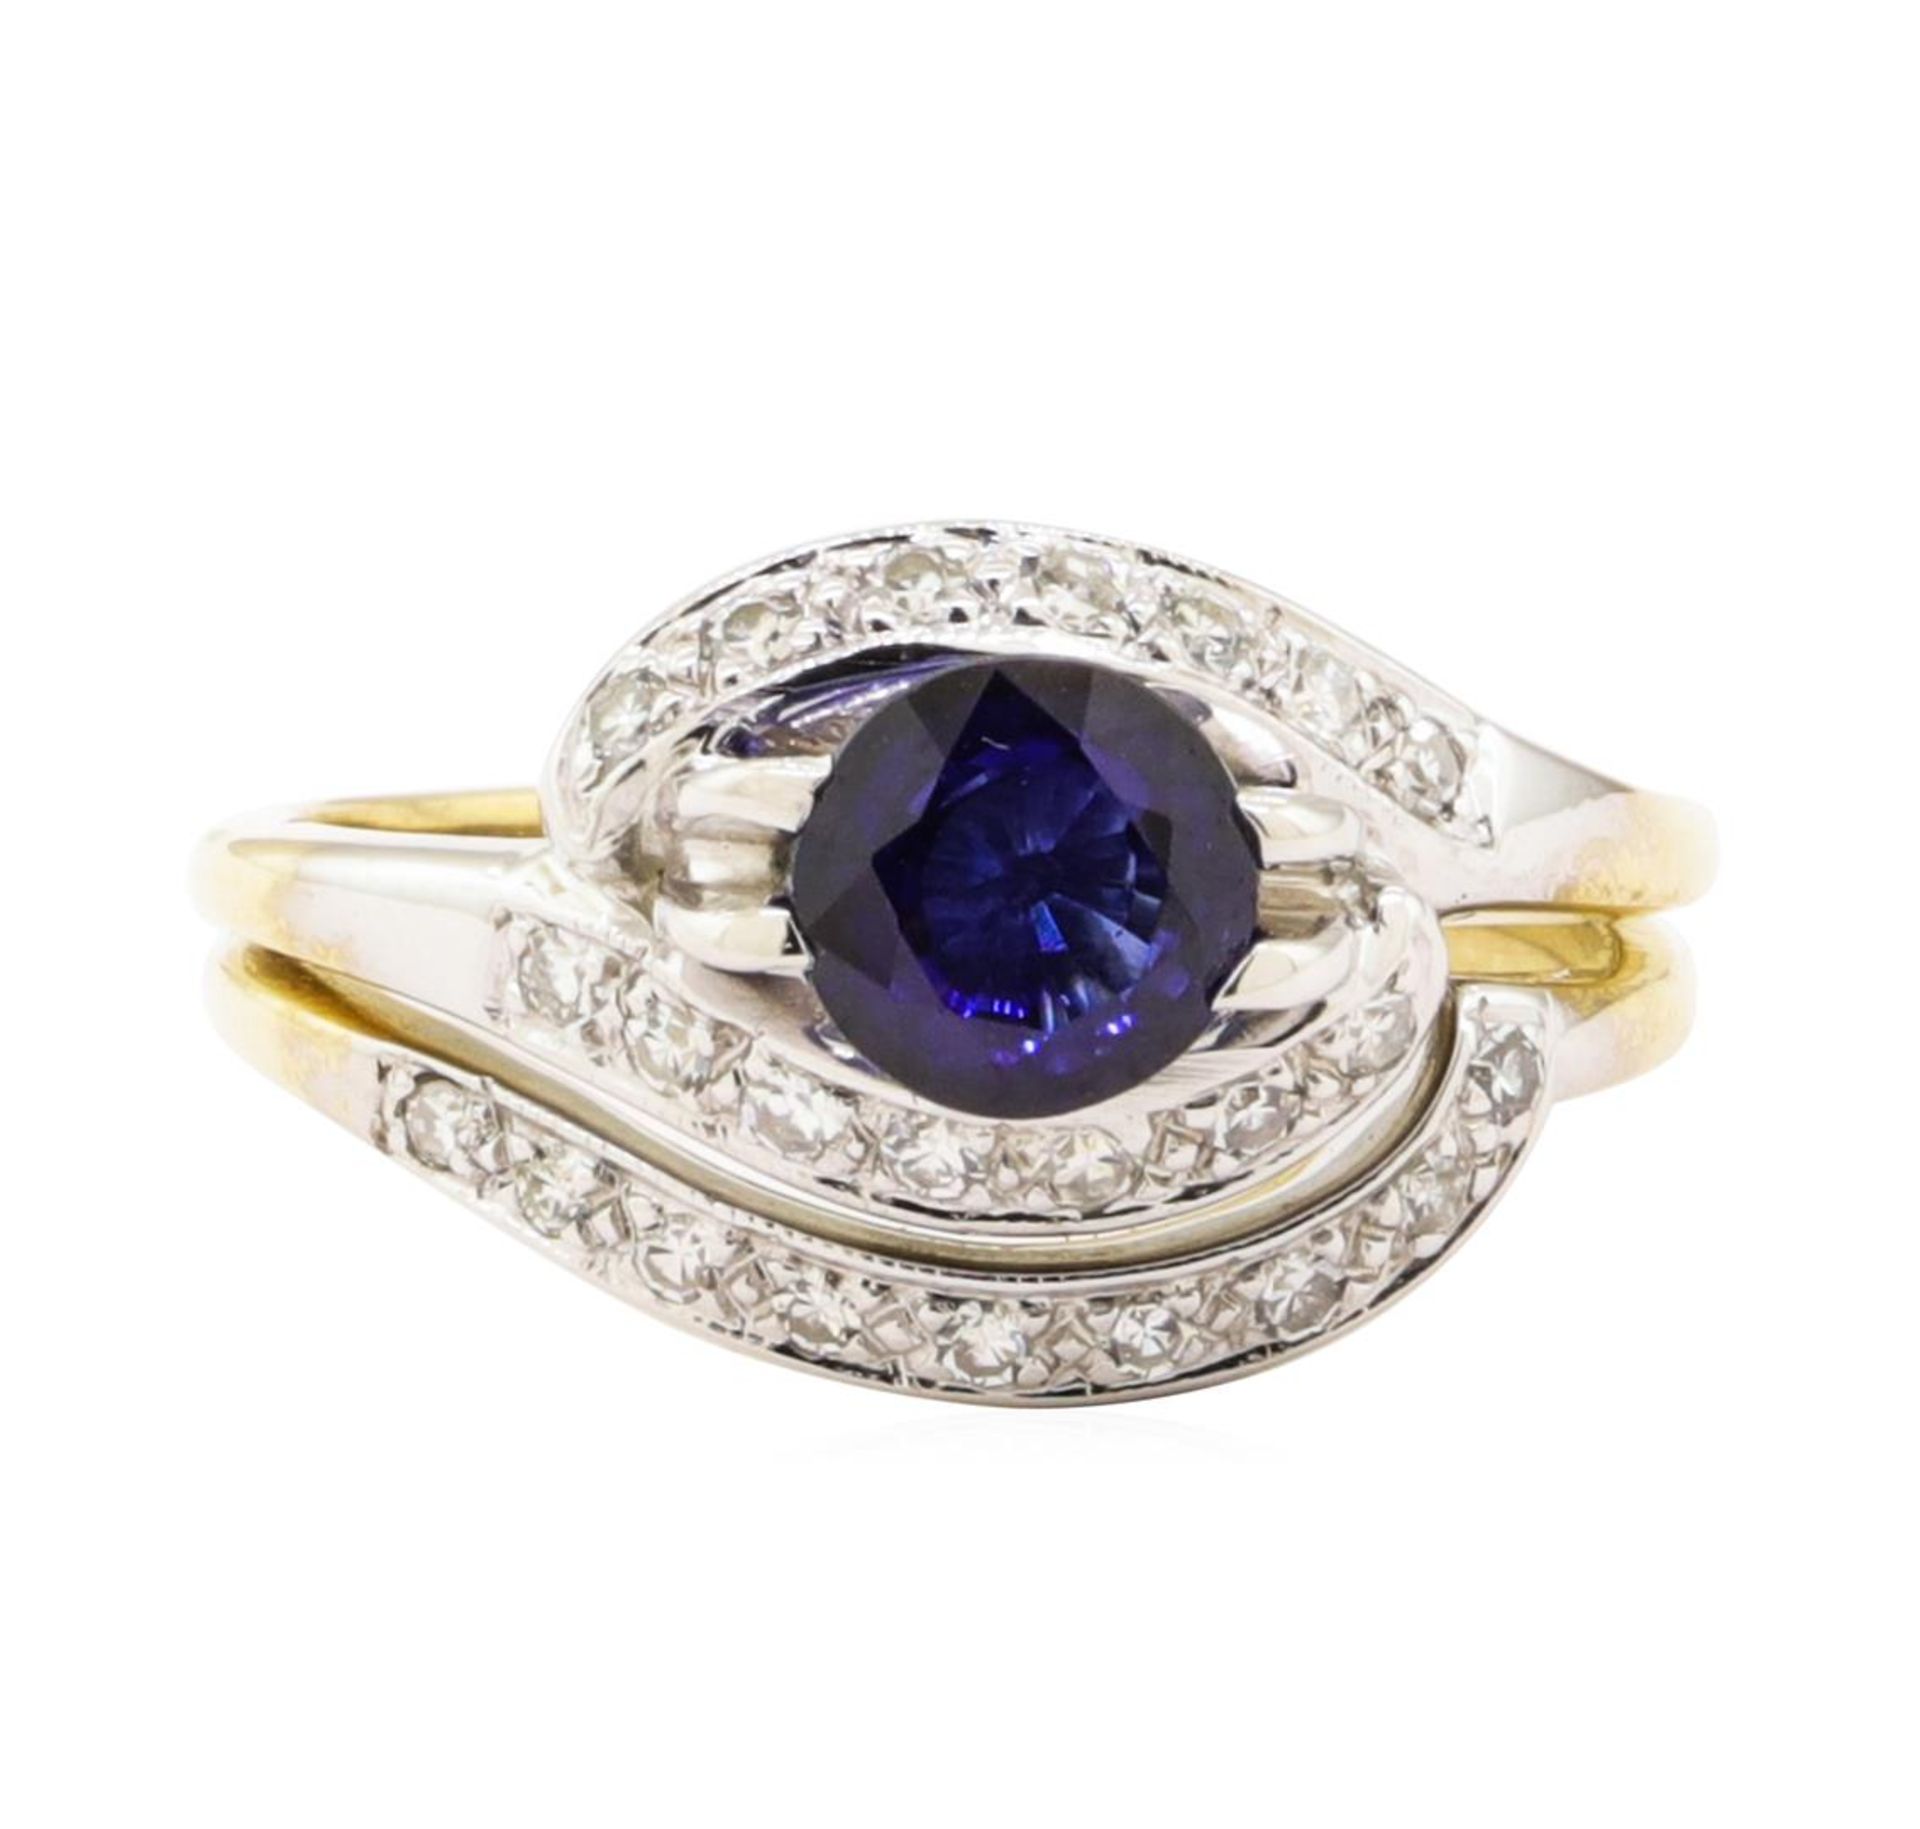 1.28 ctw Blue Sapphire And Diamond Ring And Attached Band - 14KT Yellow Gold - Image 2 of 5